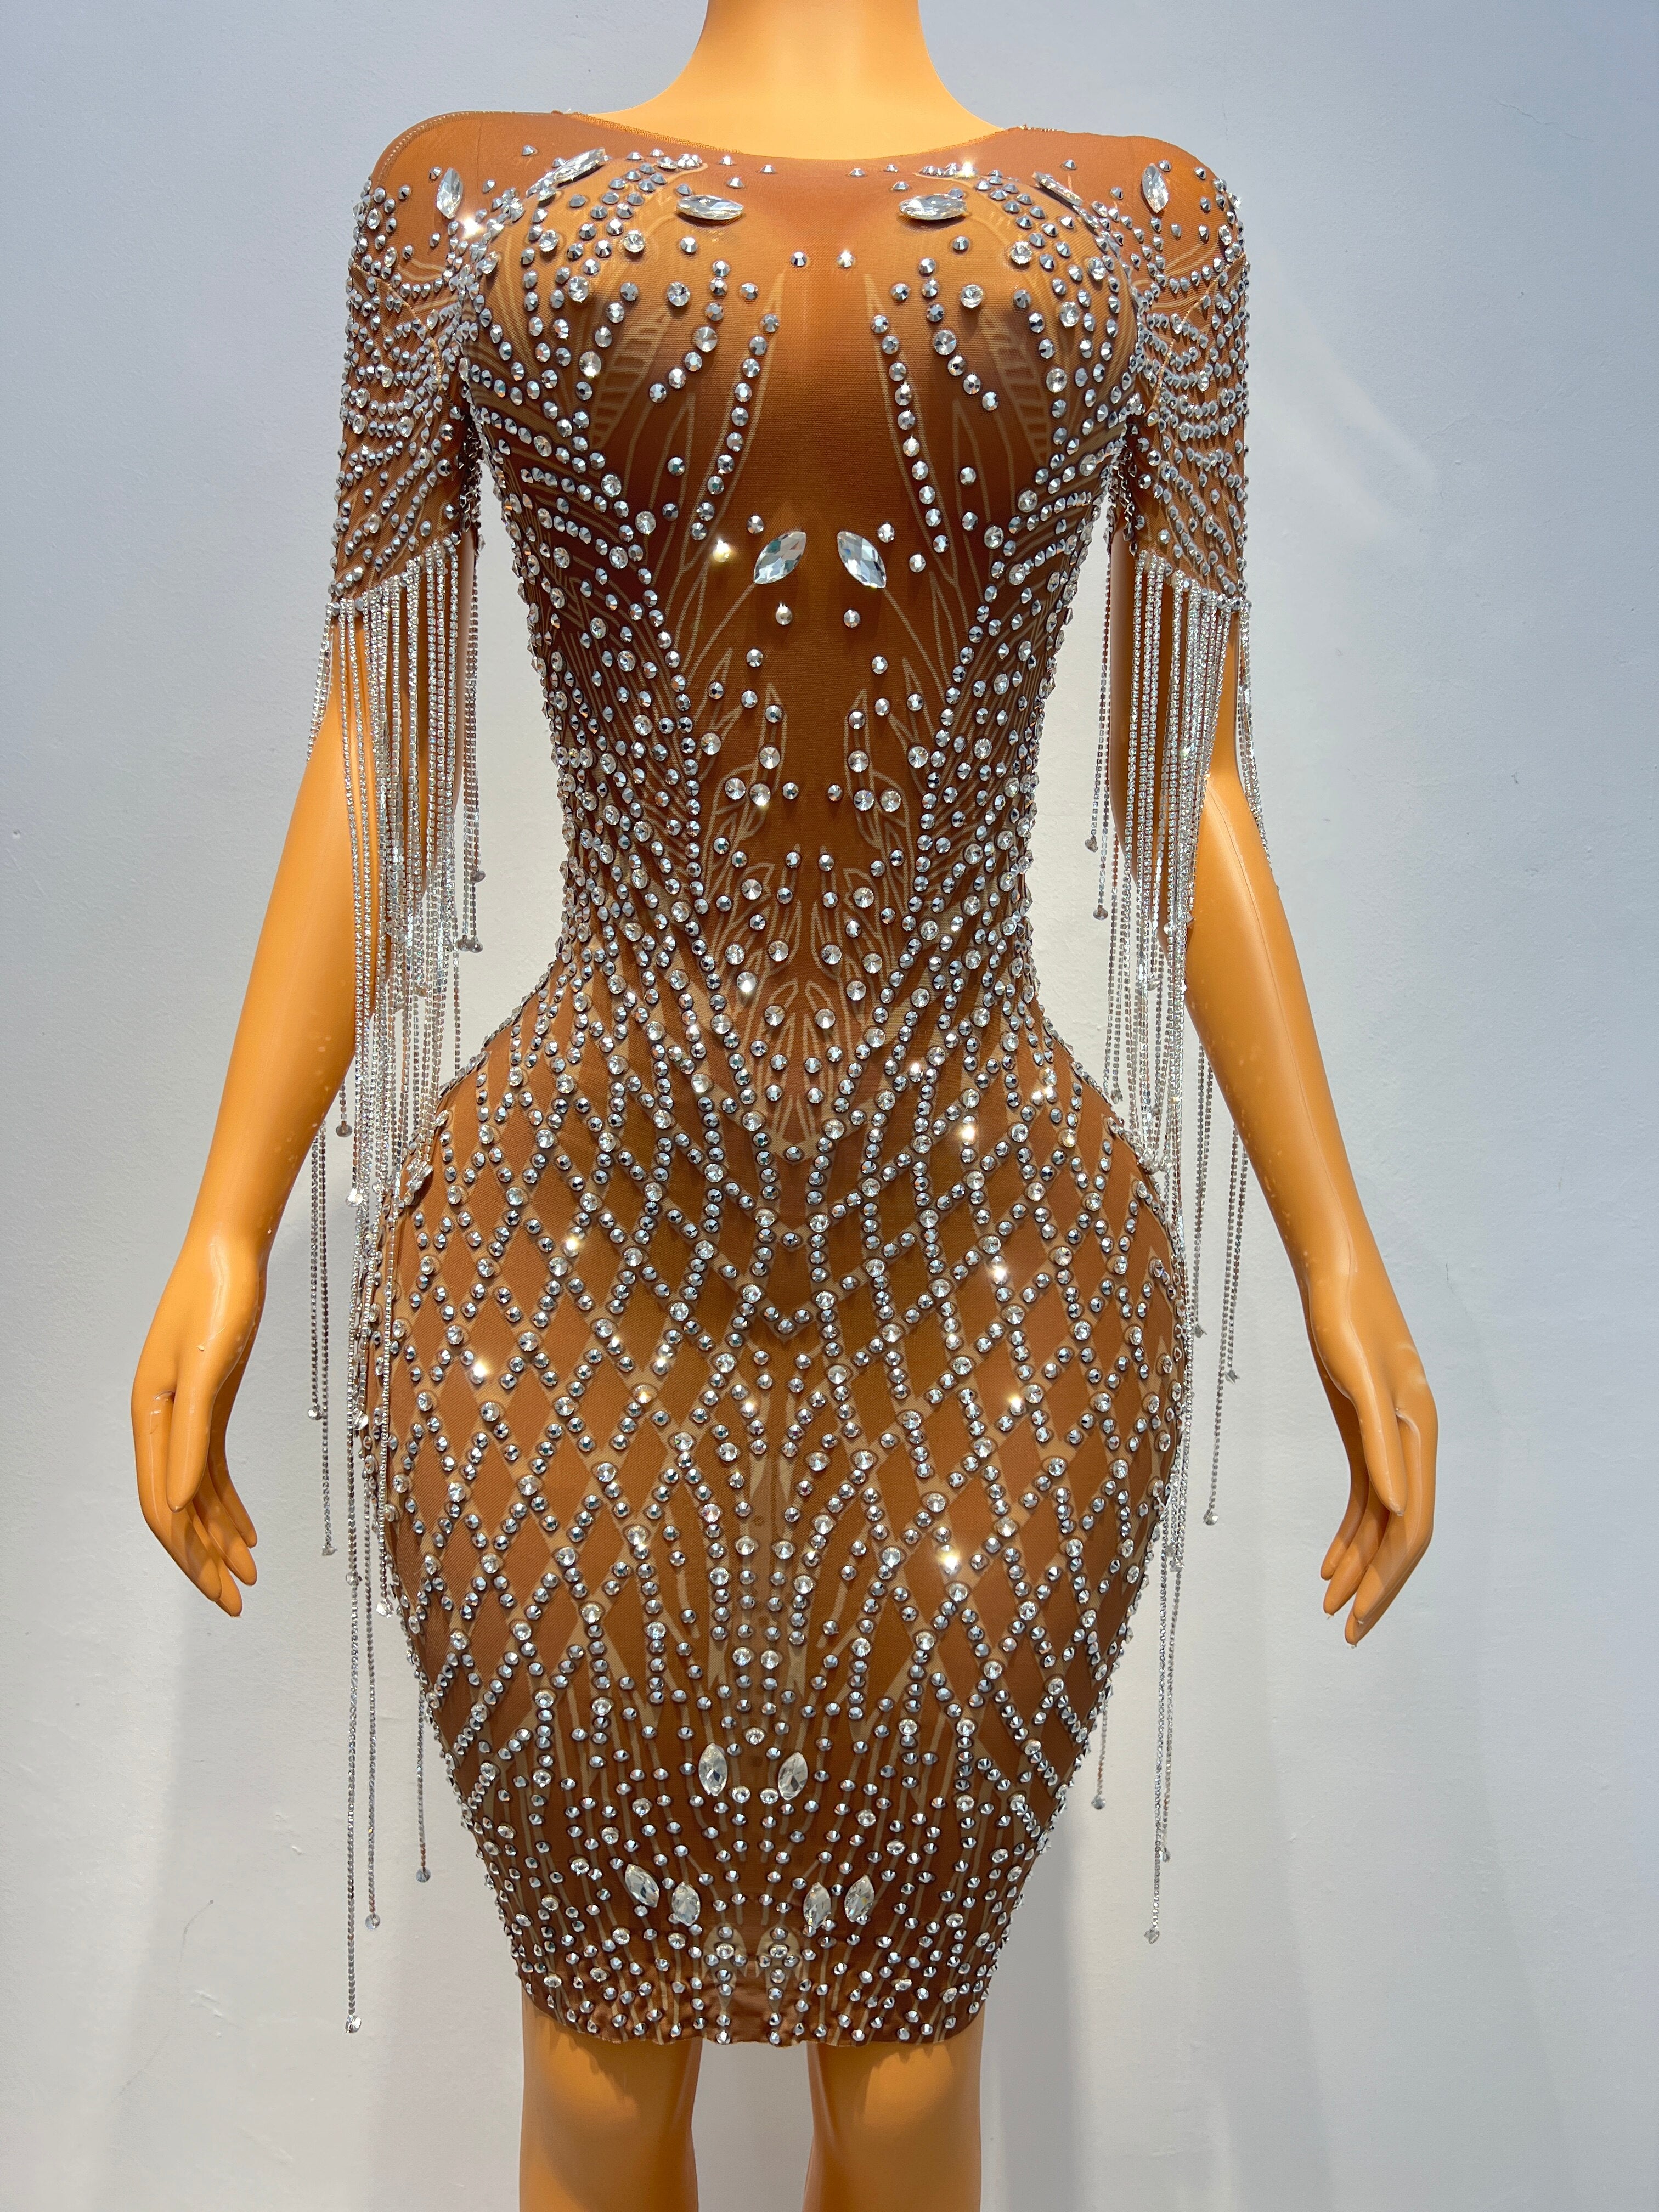 Silver Rhinestones Fringes Transparent Brown Mesh Stretch Dress Evening Birthday Celebrate Outfit Sexy Performance Costume